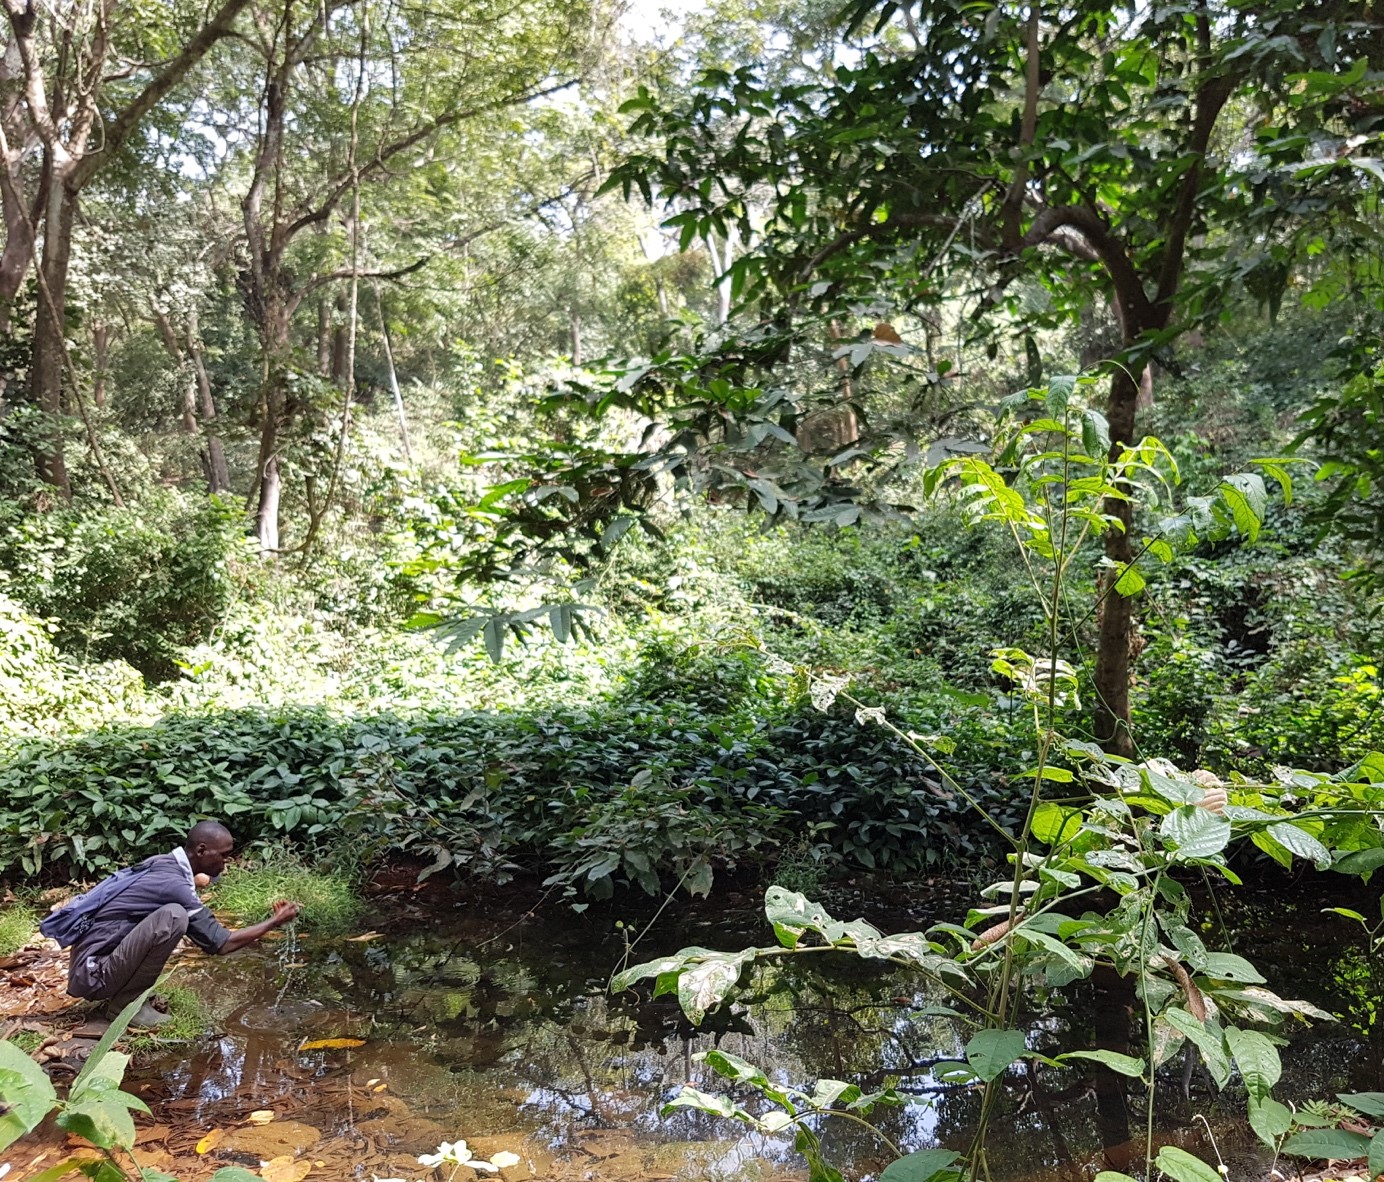 Amadu Sadjo drinking from the Spring of Tontege’s sacred site during dry season (January of 2018 by R.S. Puijk)